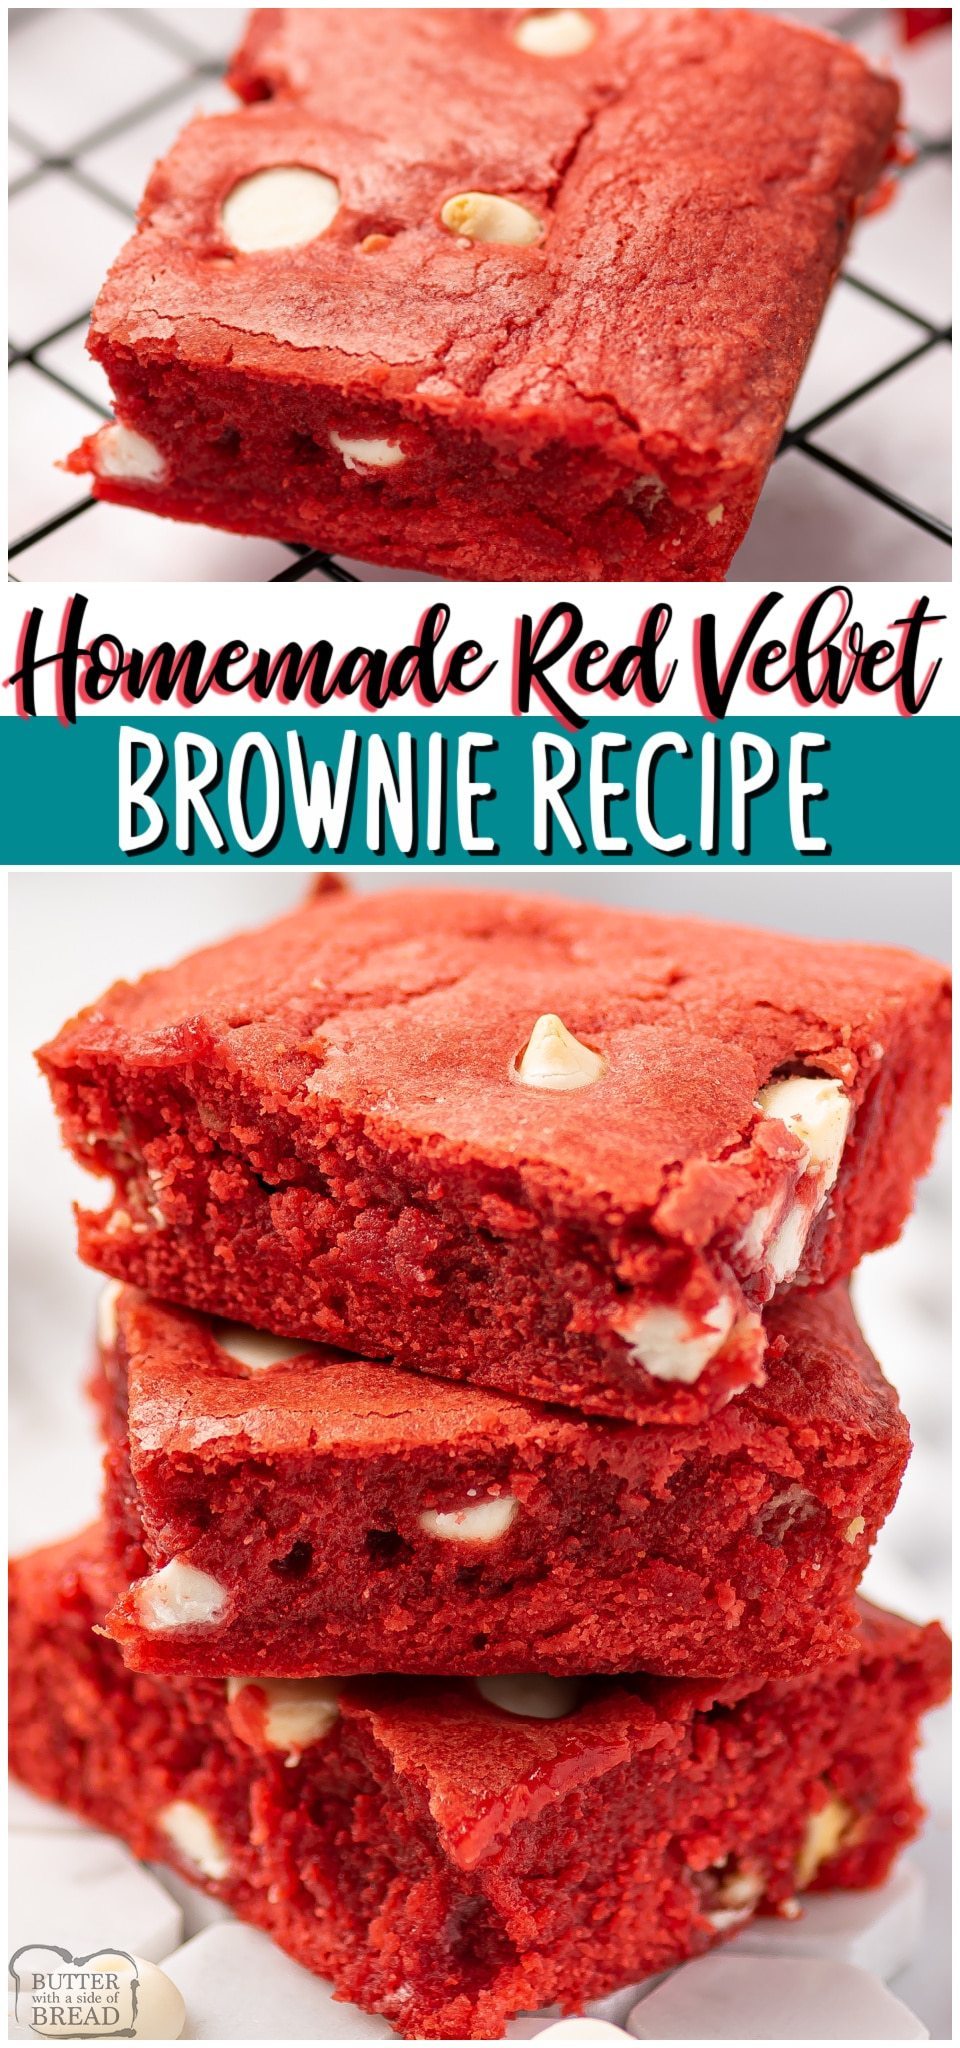 Red velvet brownies are a rich, chocolaty brownie with red velvet color, scattered with chocolate chips. Homemade Red Velvet Brownies perfect for Valentine's day!